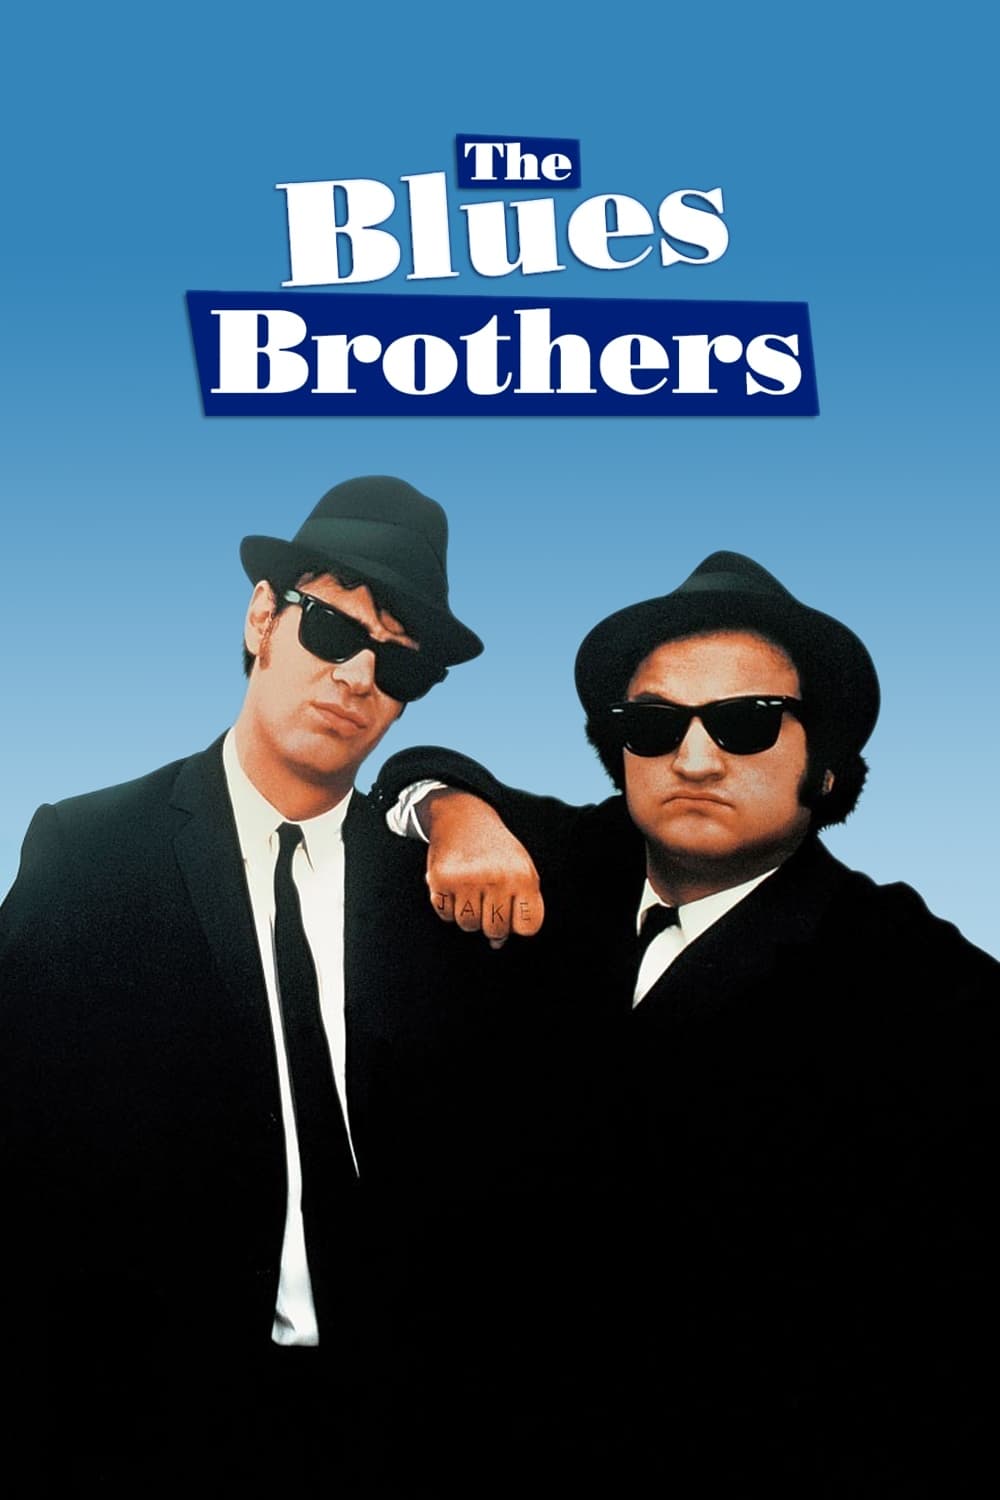 the blues brothers movie review